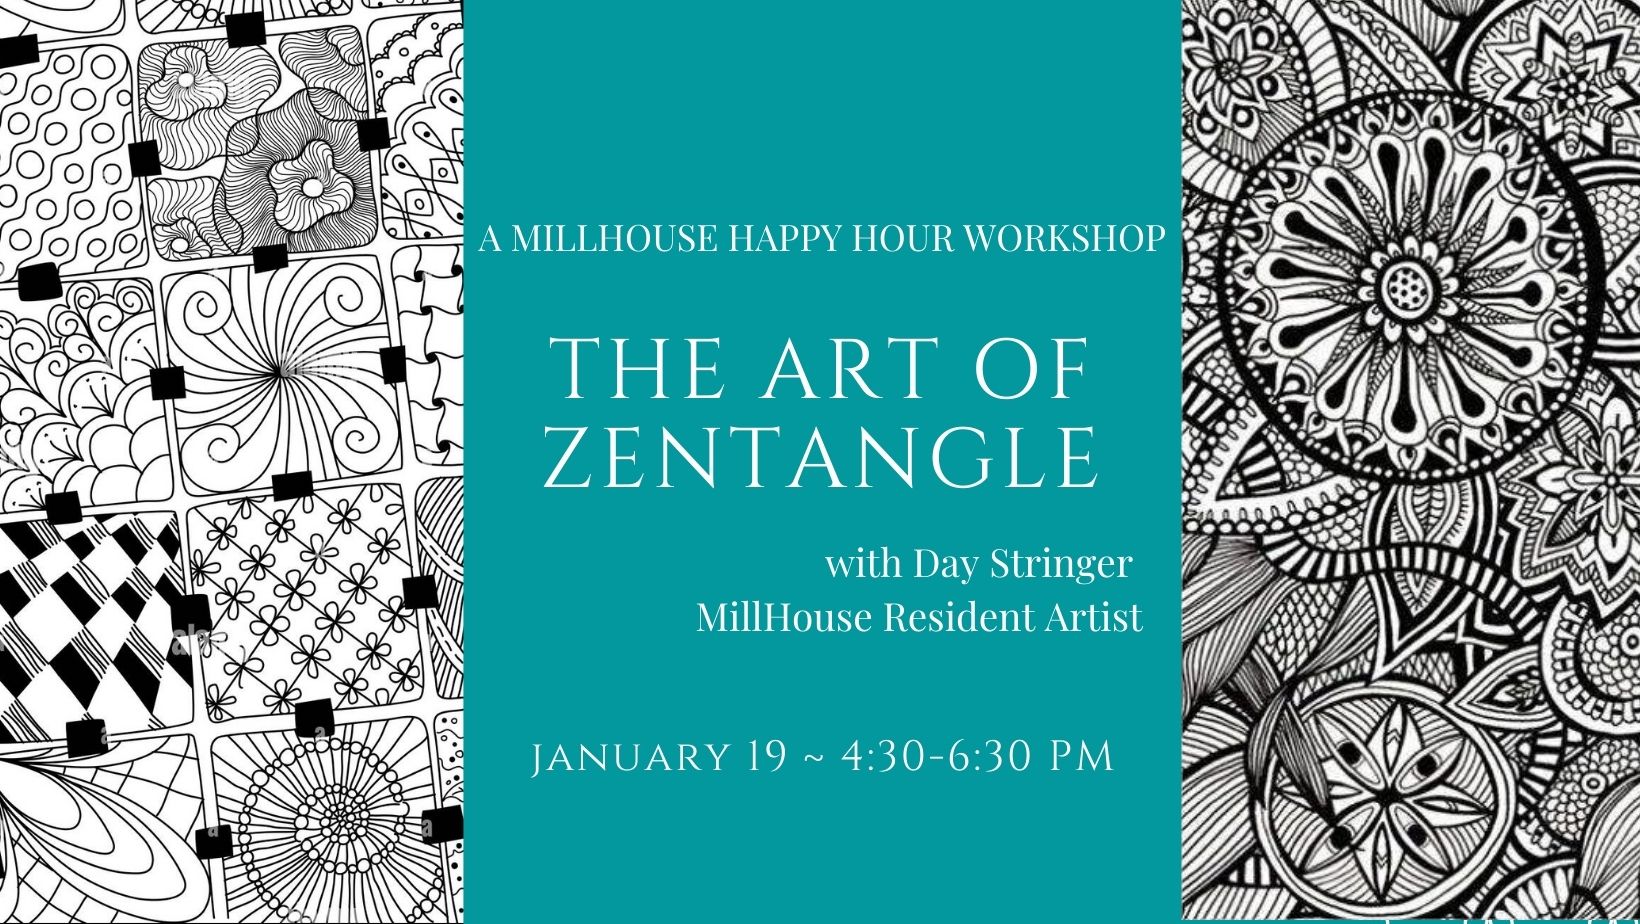 The Art of Zentangle - A MillHouse Happy Hour Workshop with Day Stringer